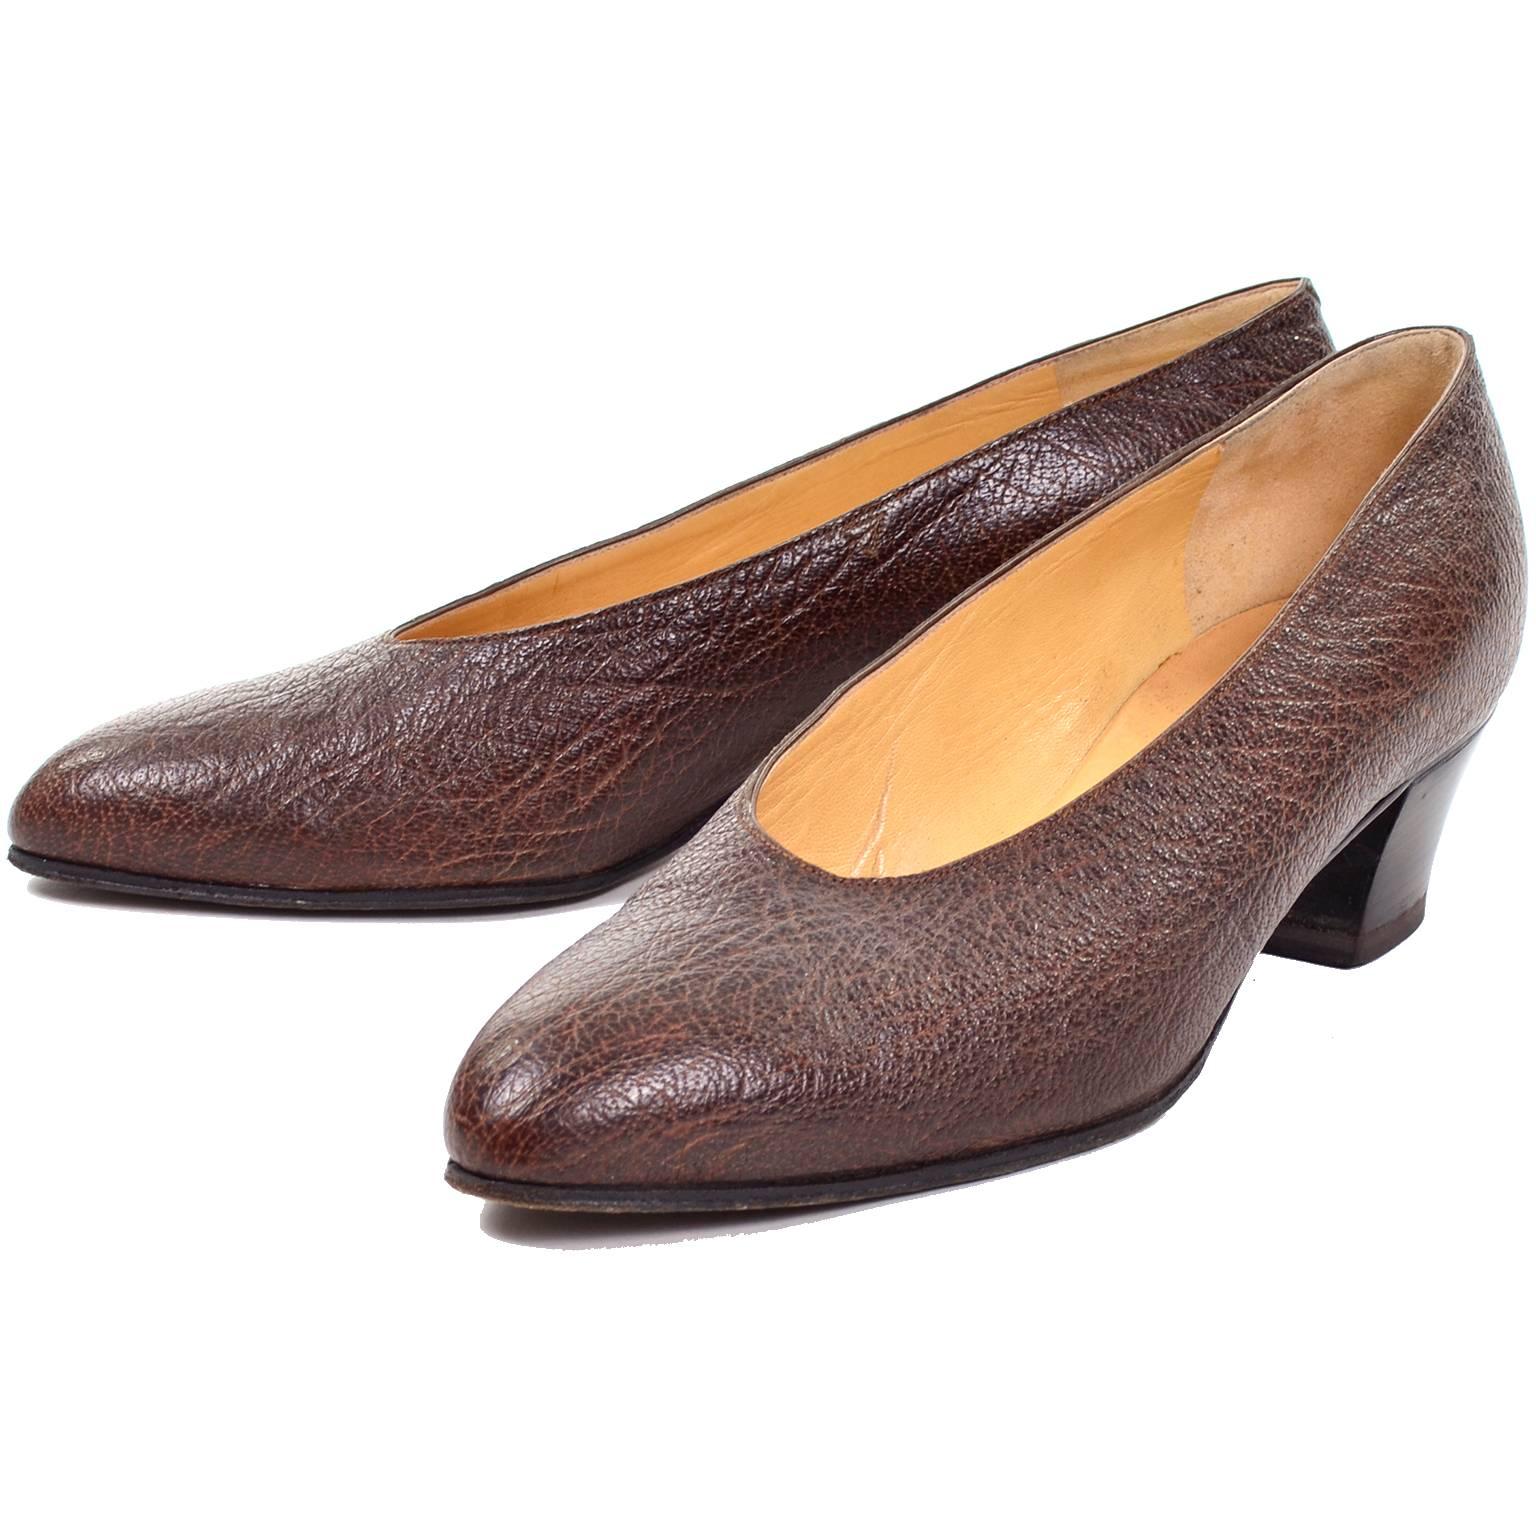 These classic vintage pumps from Hermes are from one of our all time favorite estates of vintage clothing.  The woman who owned these owned many important pieces by the most important designers from the 1950's through the 1970's. These brown